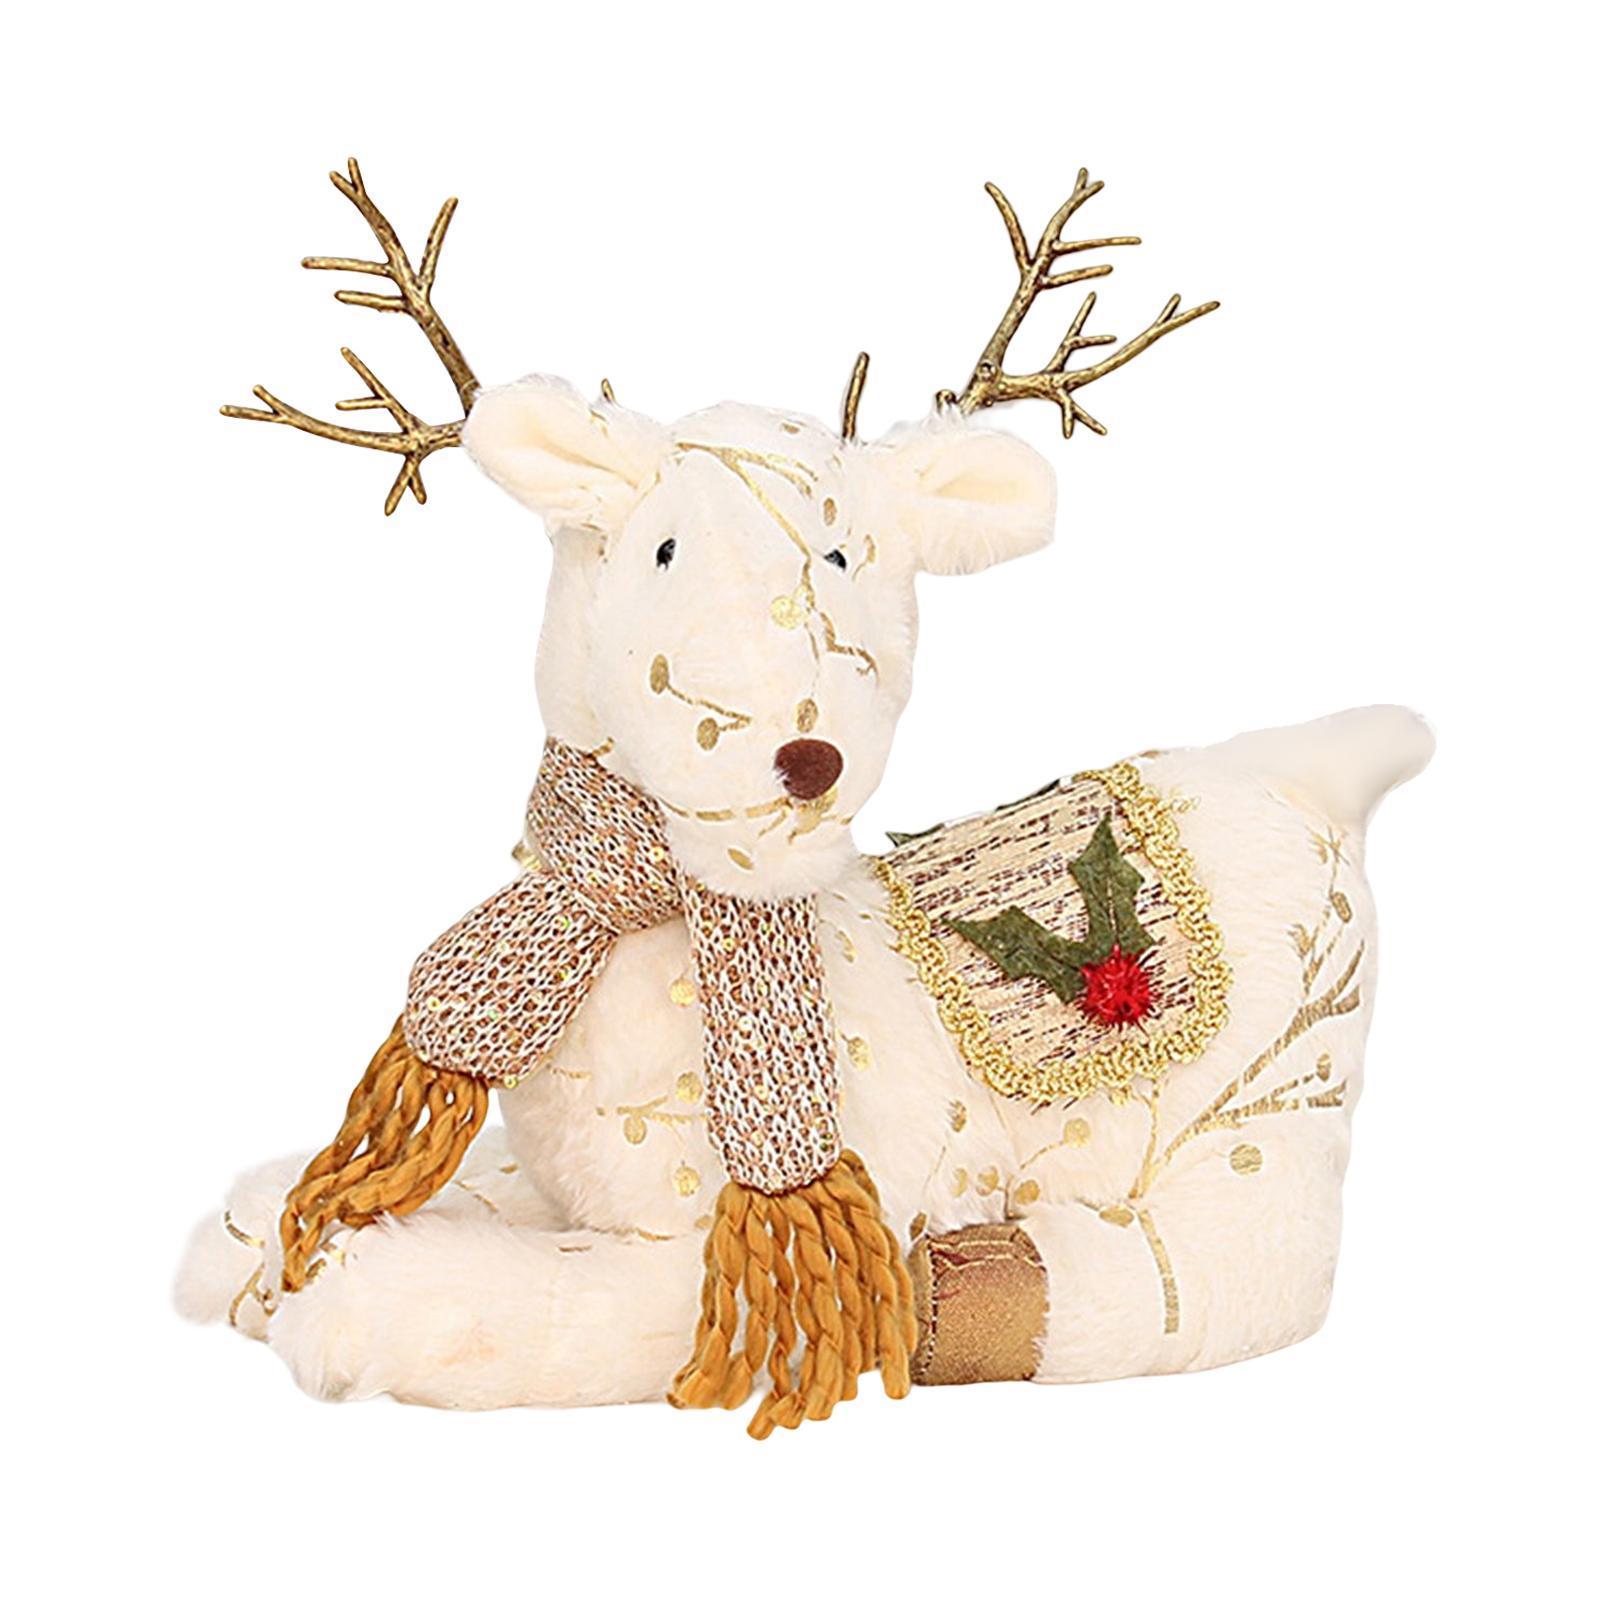 Elk Ornament Hotel Shopping Mall Window Party Decor Collectibles